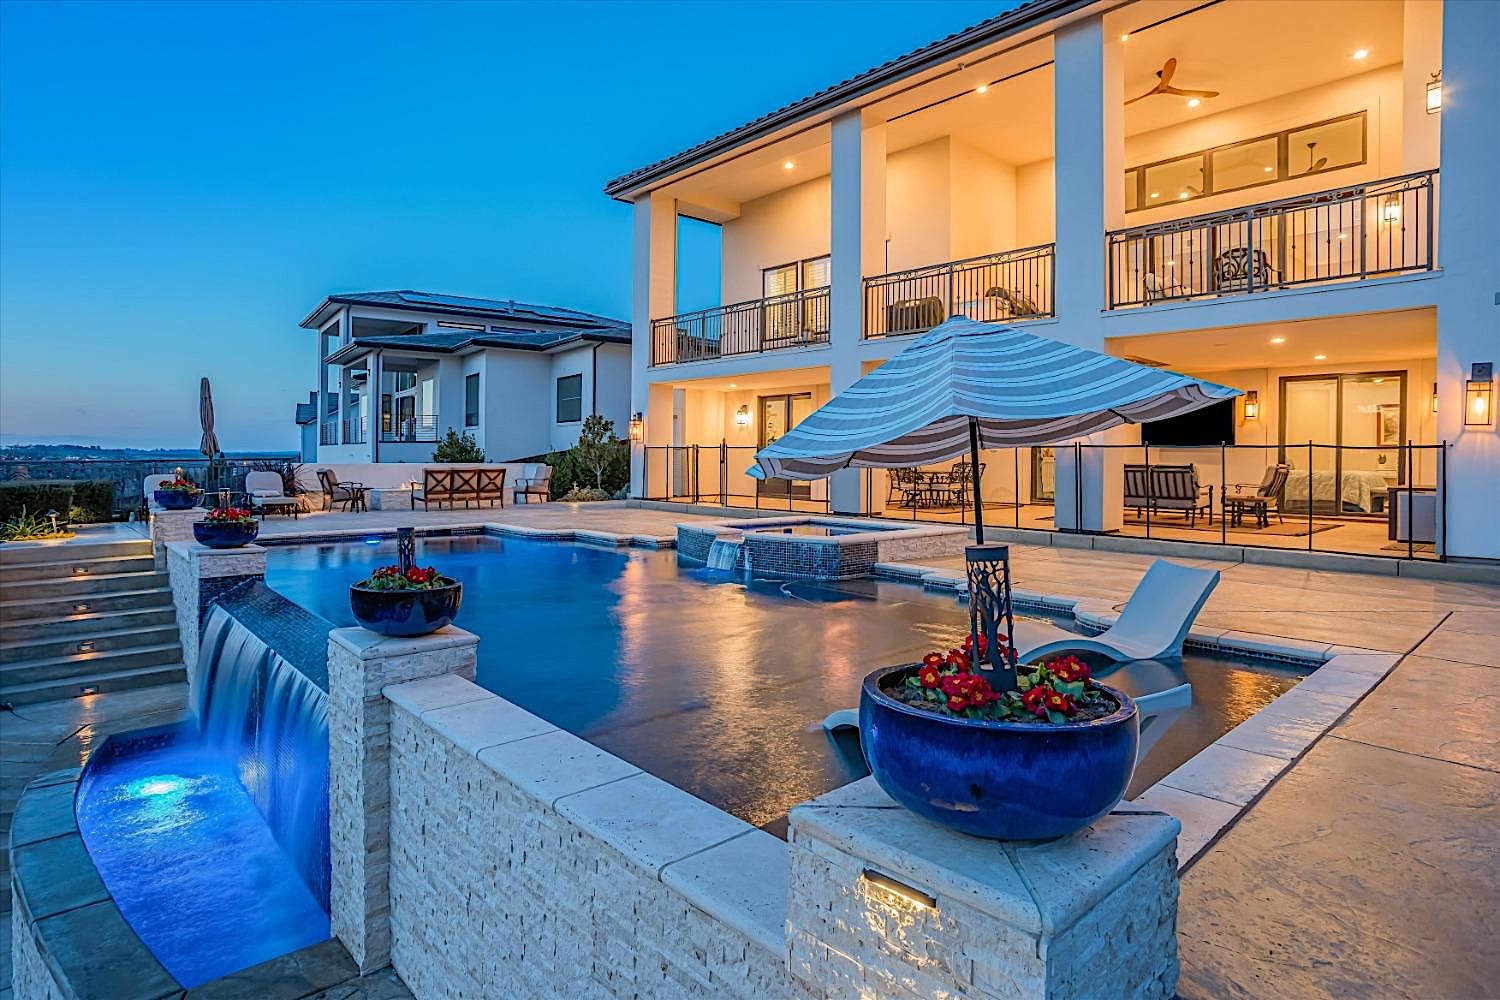 Folsom home offers luxury spa-like living with a view